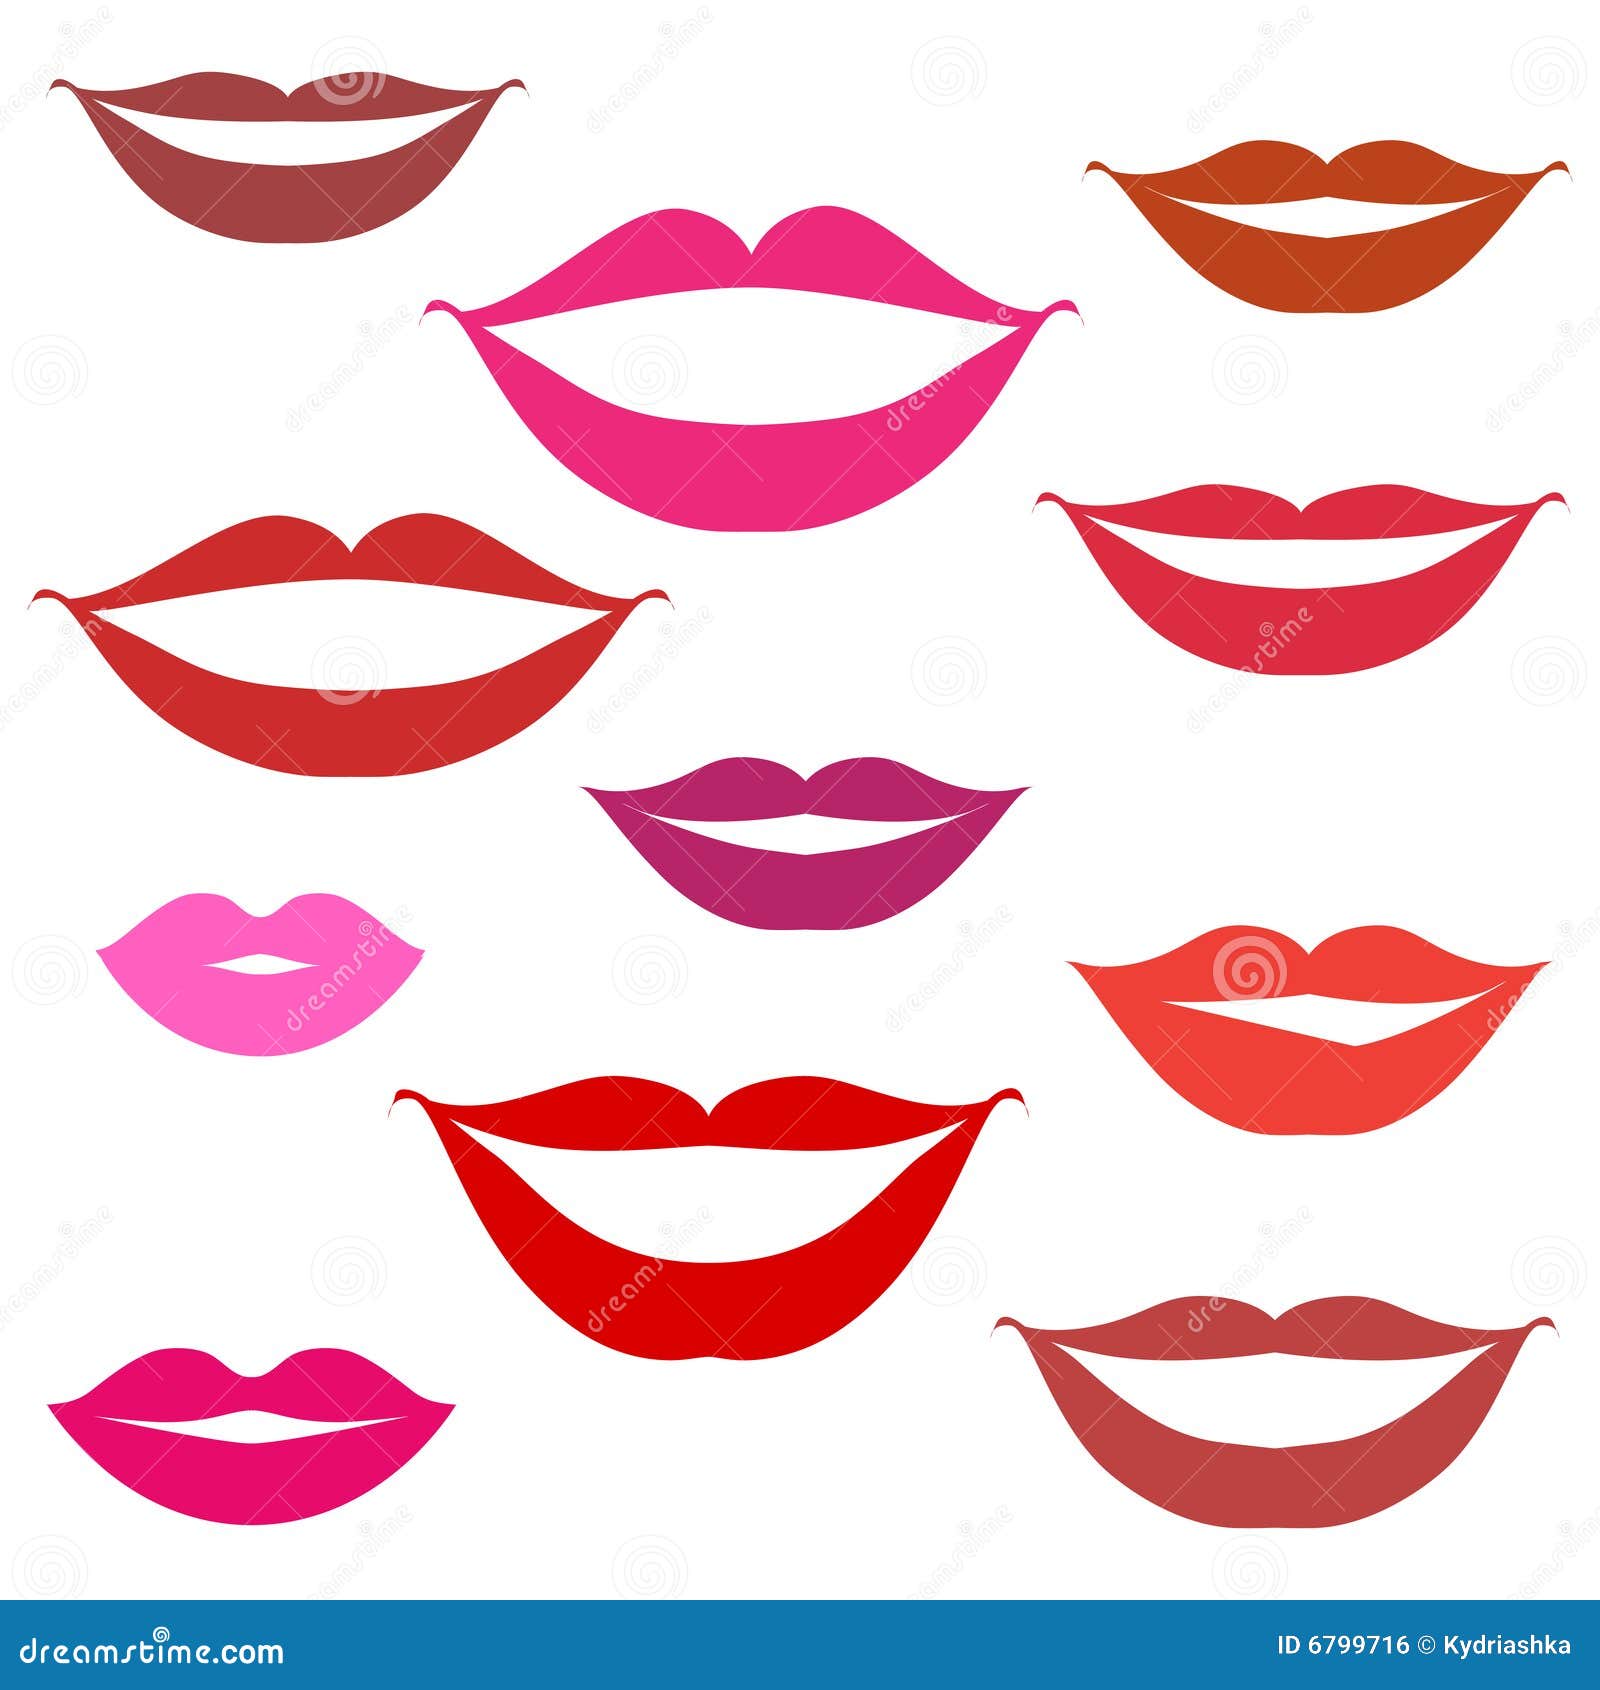 clipart smiley lips - photo #36